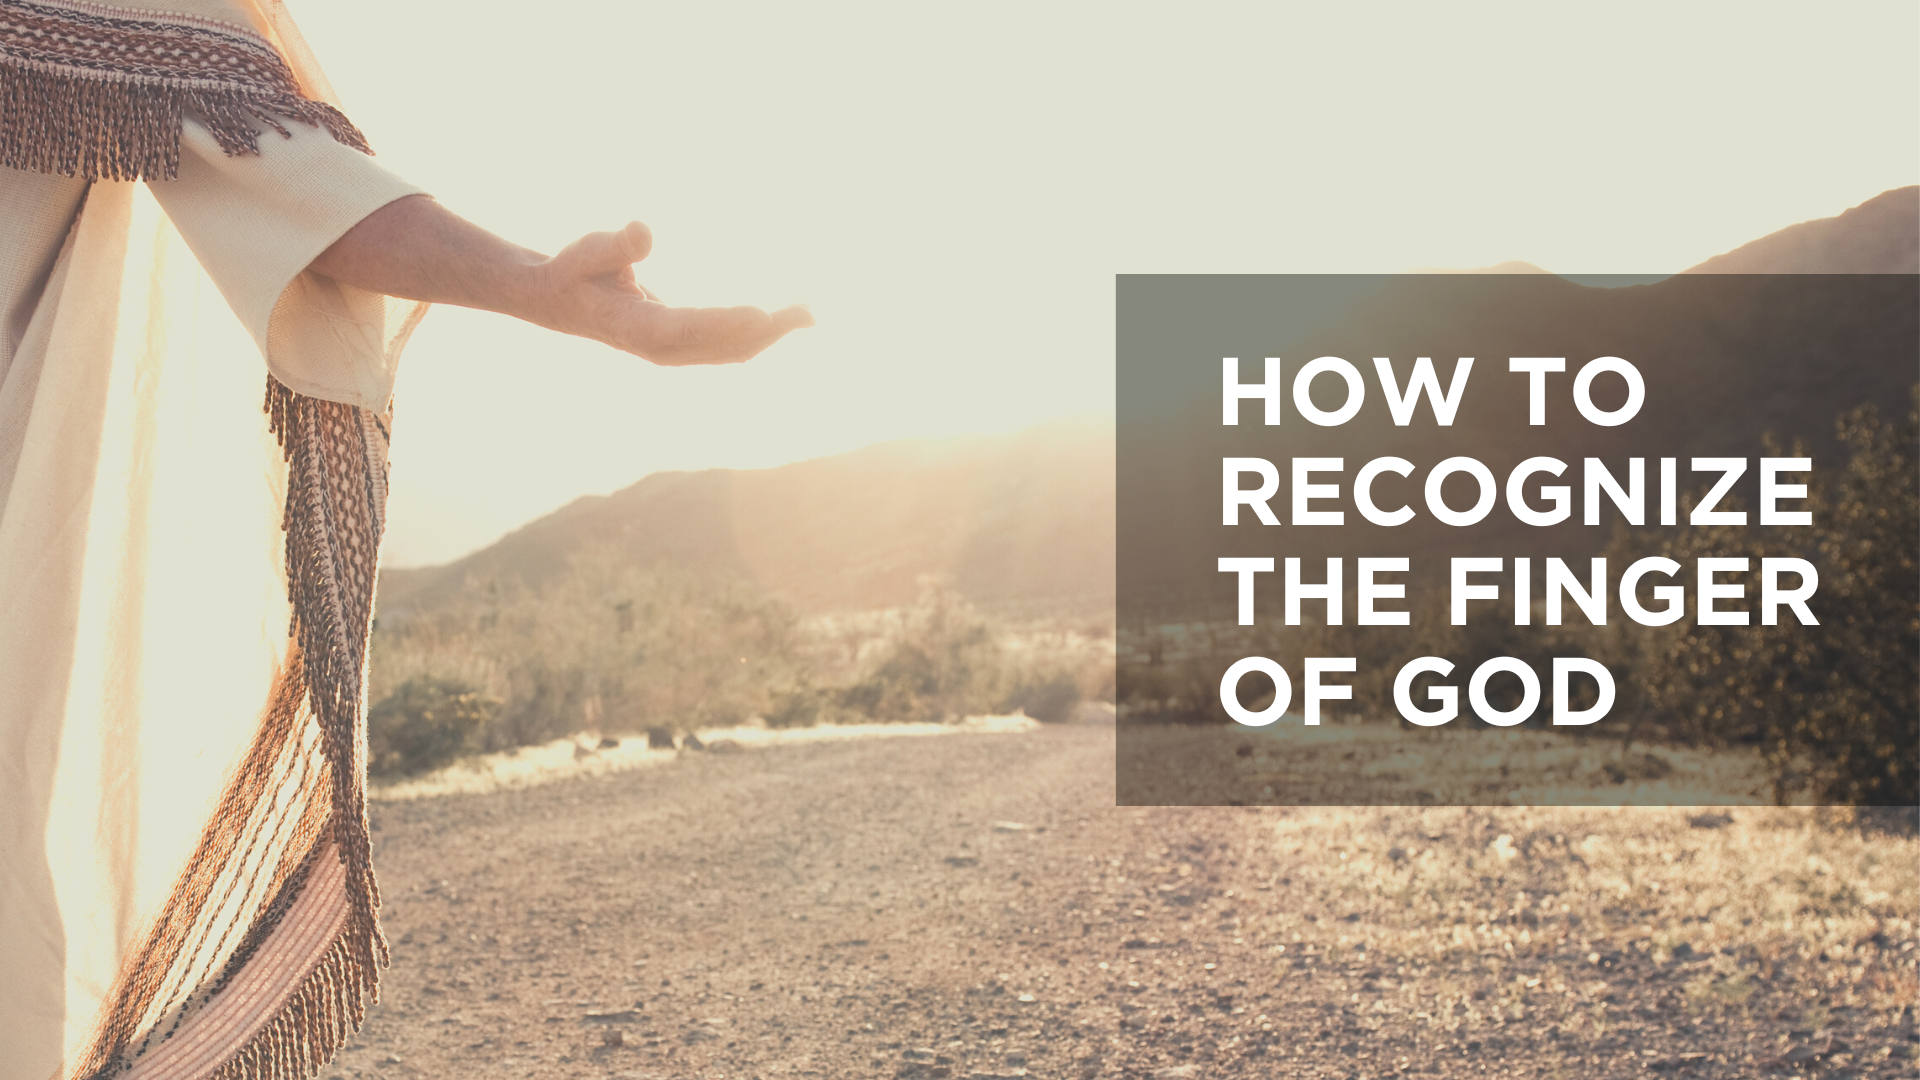 How to Recognize the Finger of God